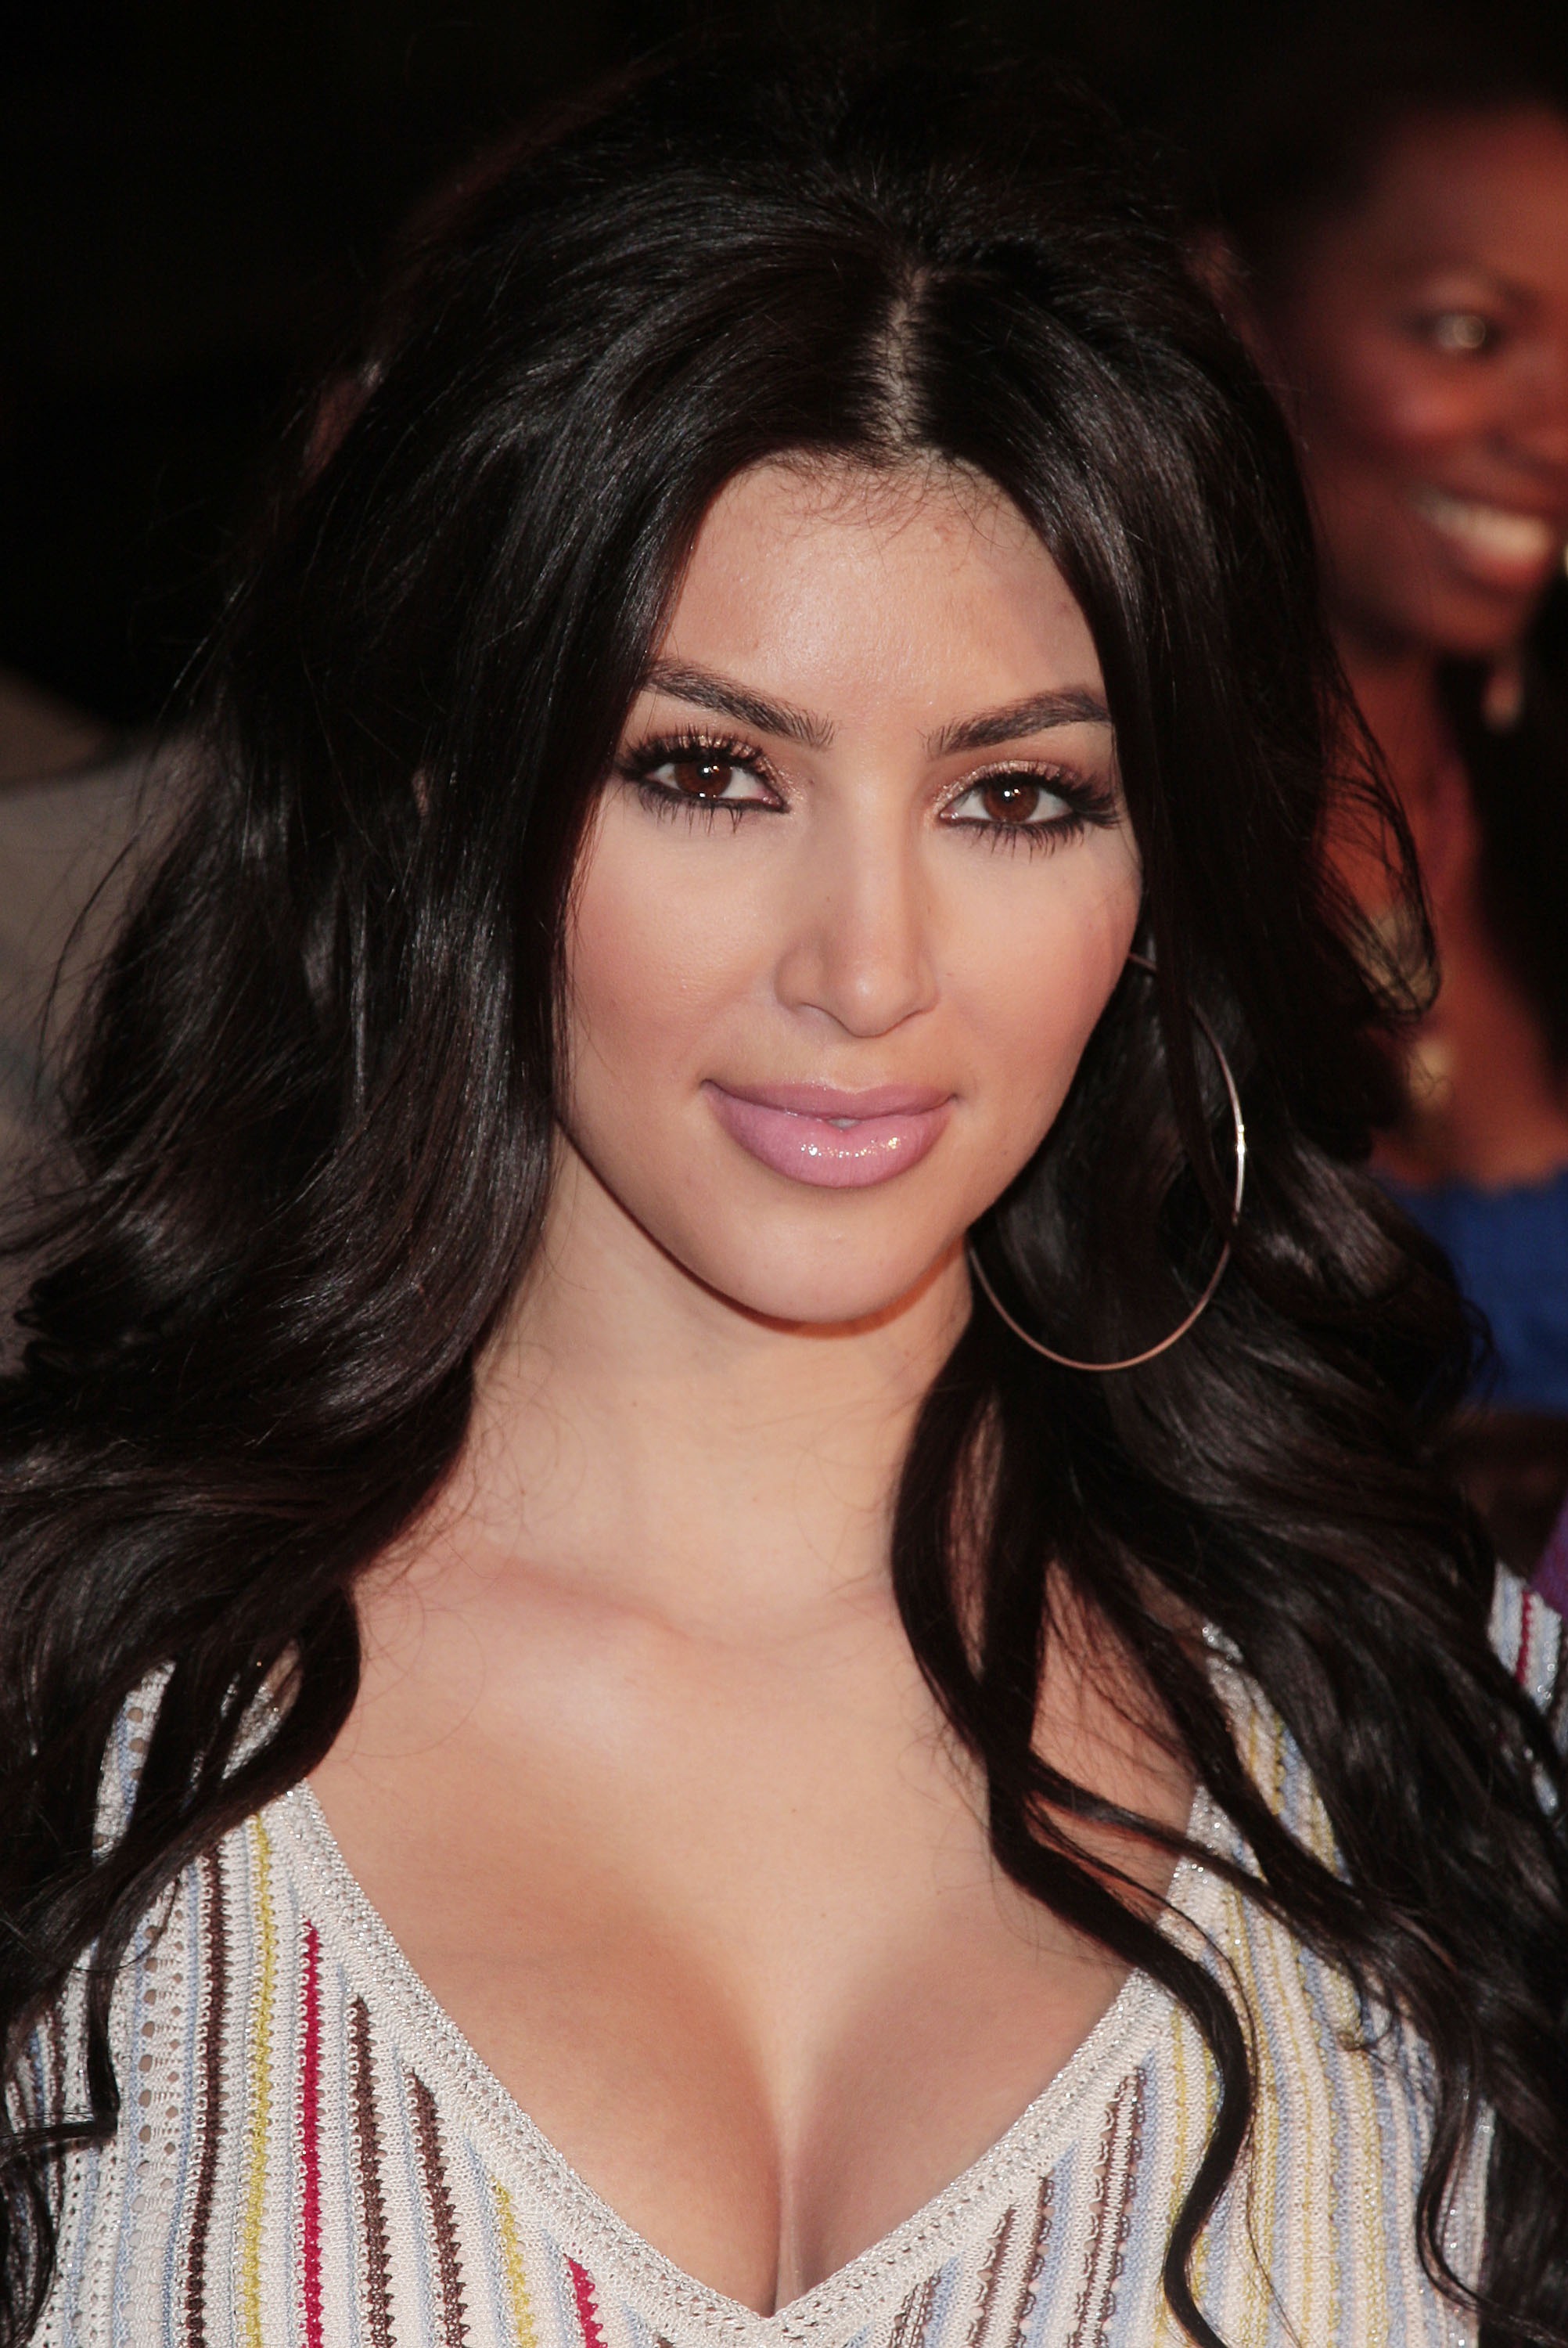 Kim Kardashian's Clothes in the 2000s Will Make You LOL